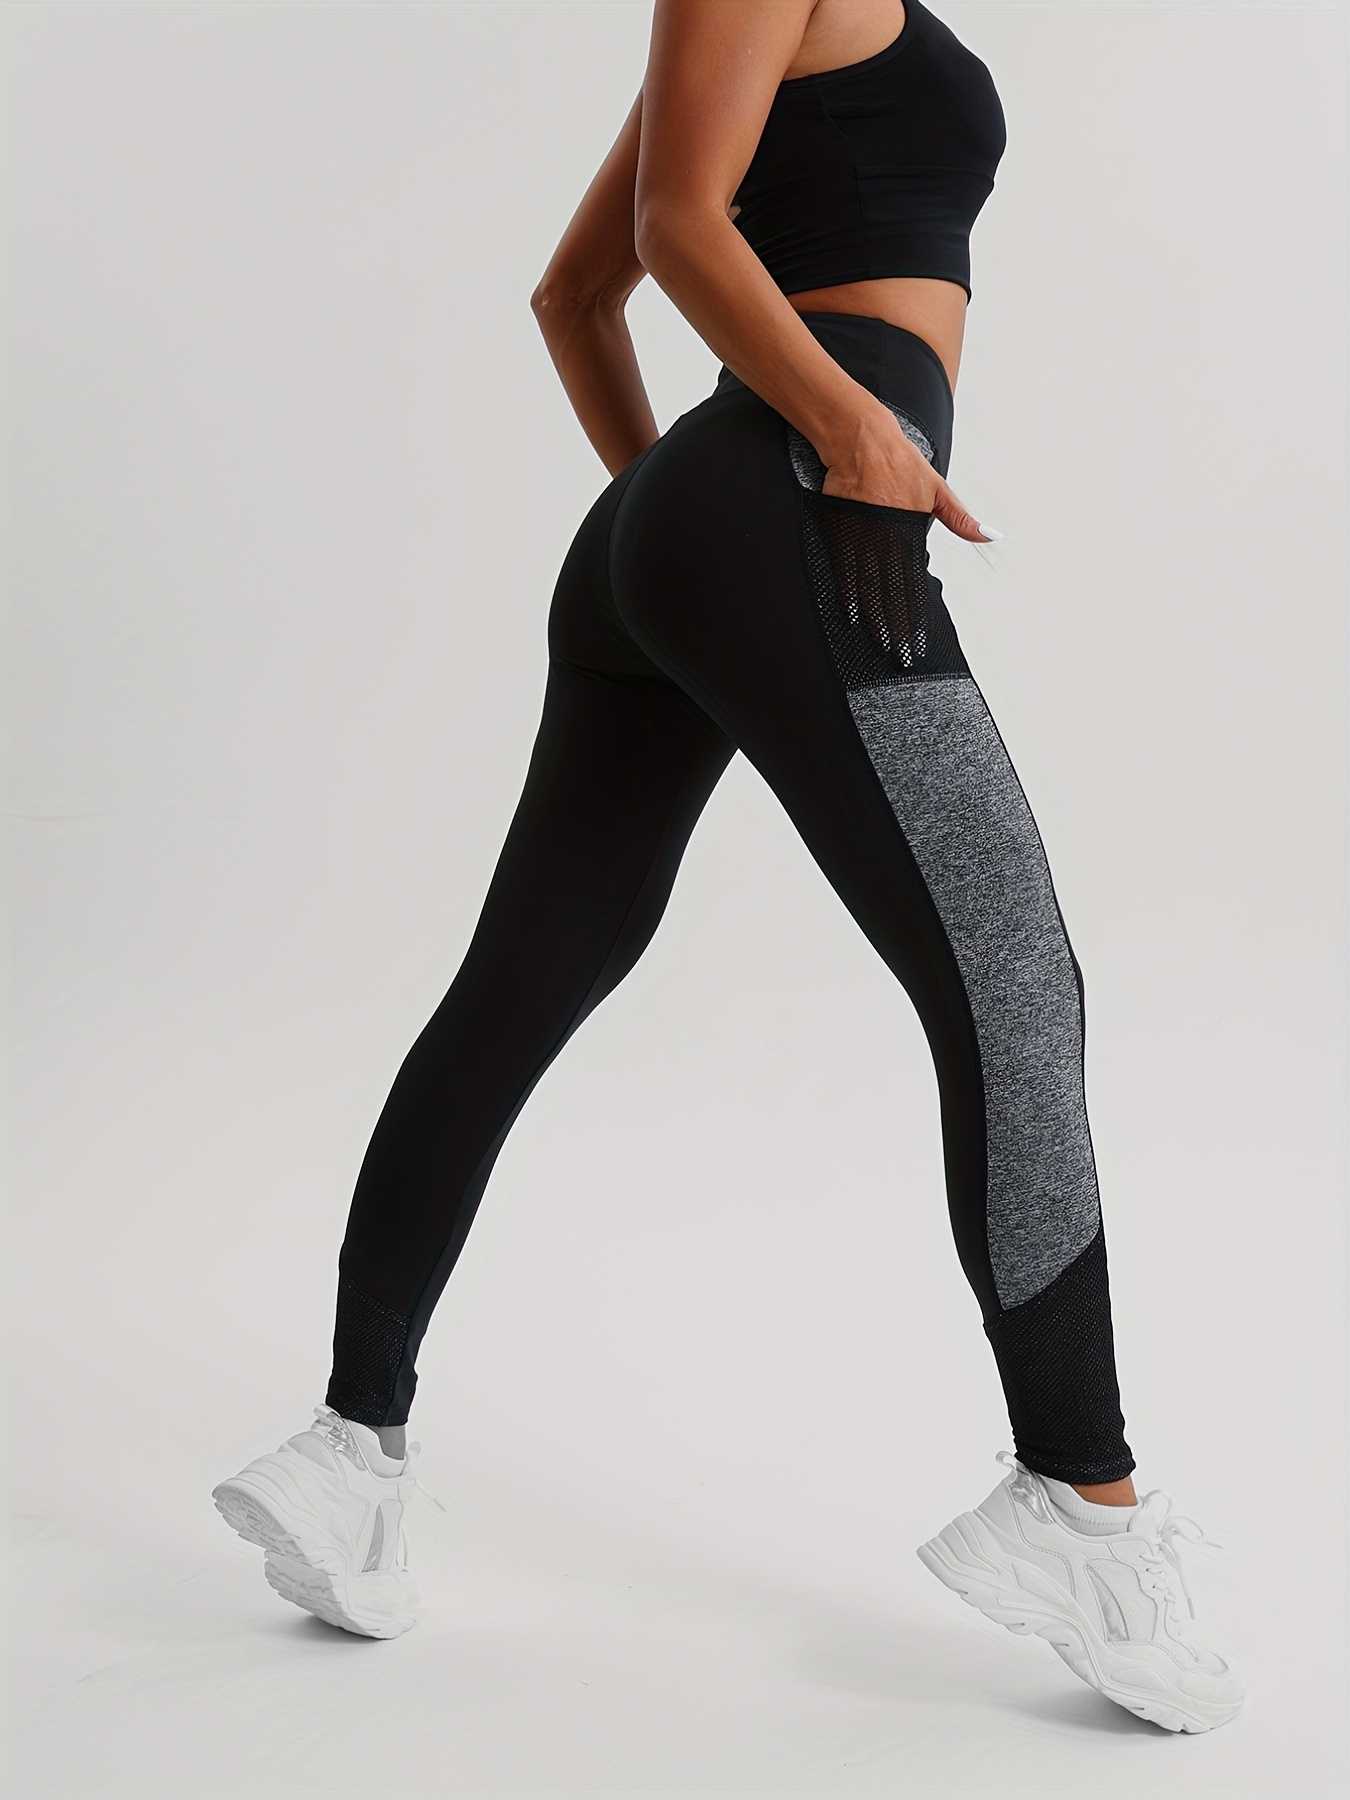 Activewear High Waisted Black and Grey Color Mesh Workout Leggings